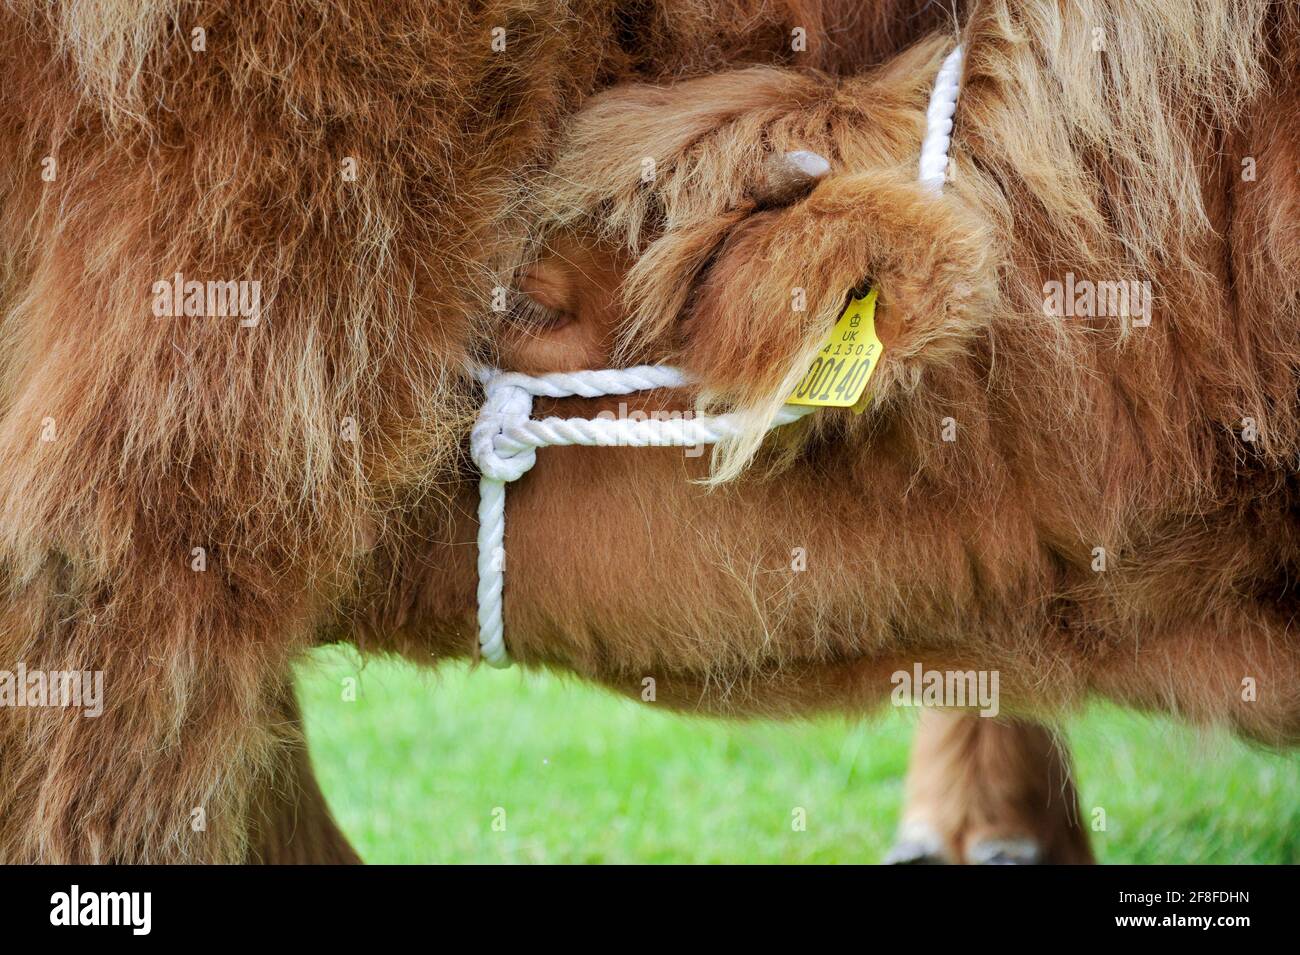 Highland calf suckling its mother at a rural show in Yorkshire, UK. Stock Photo